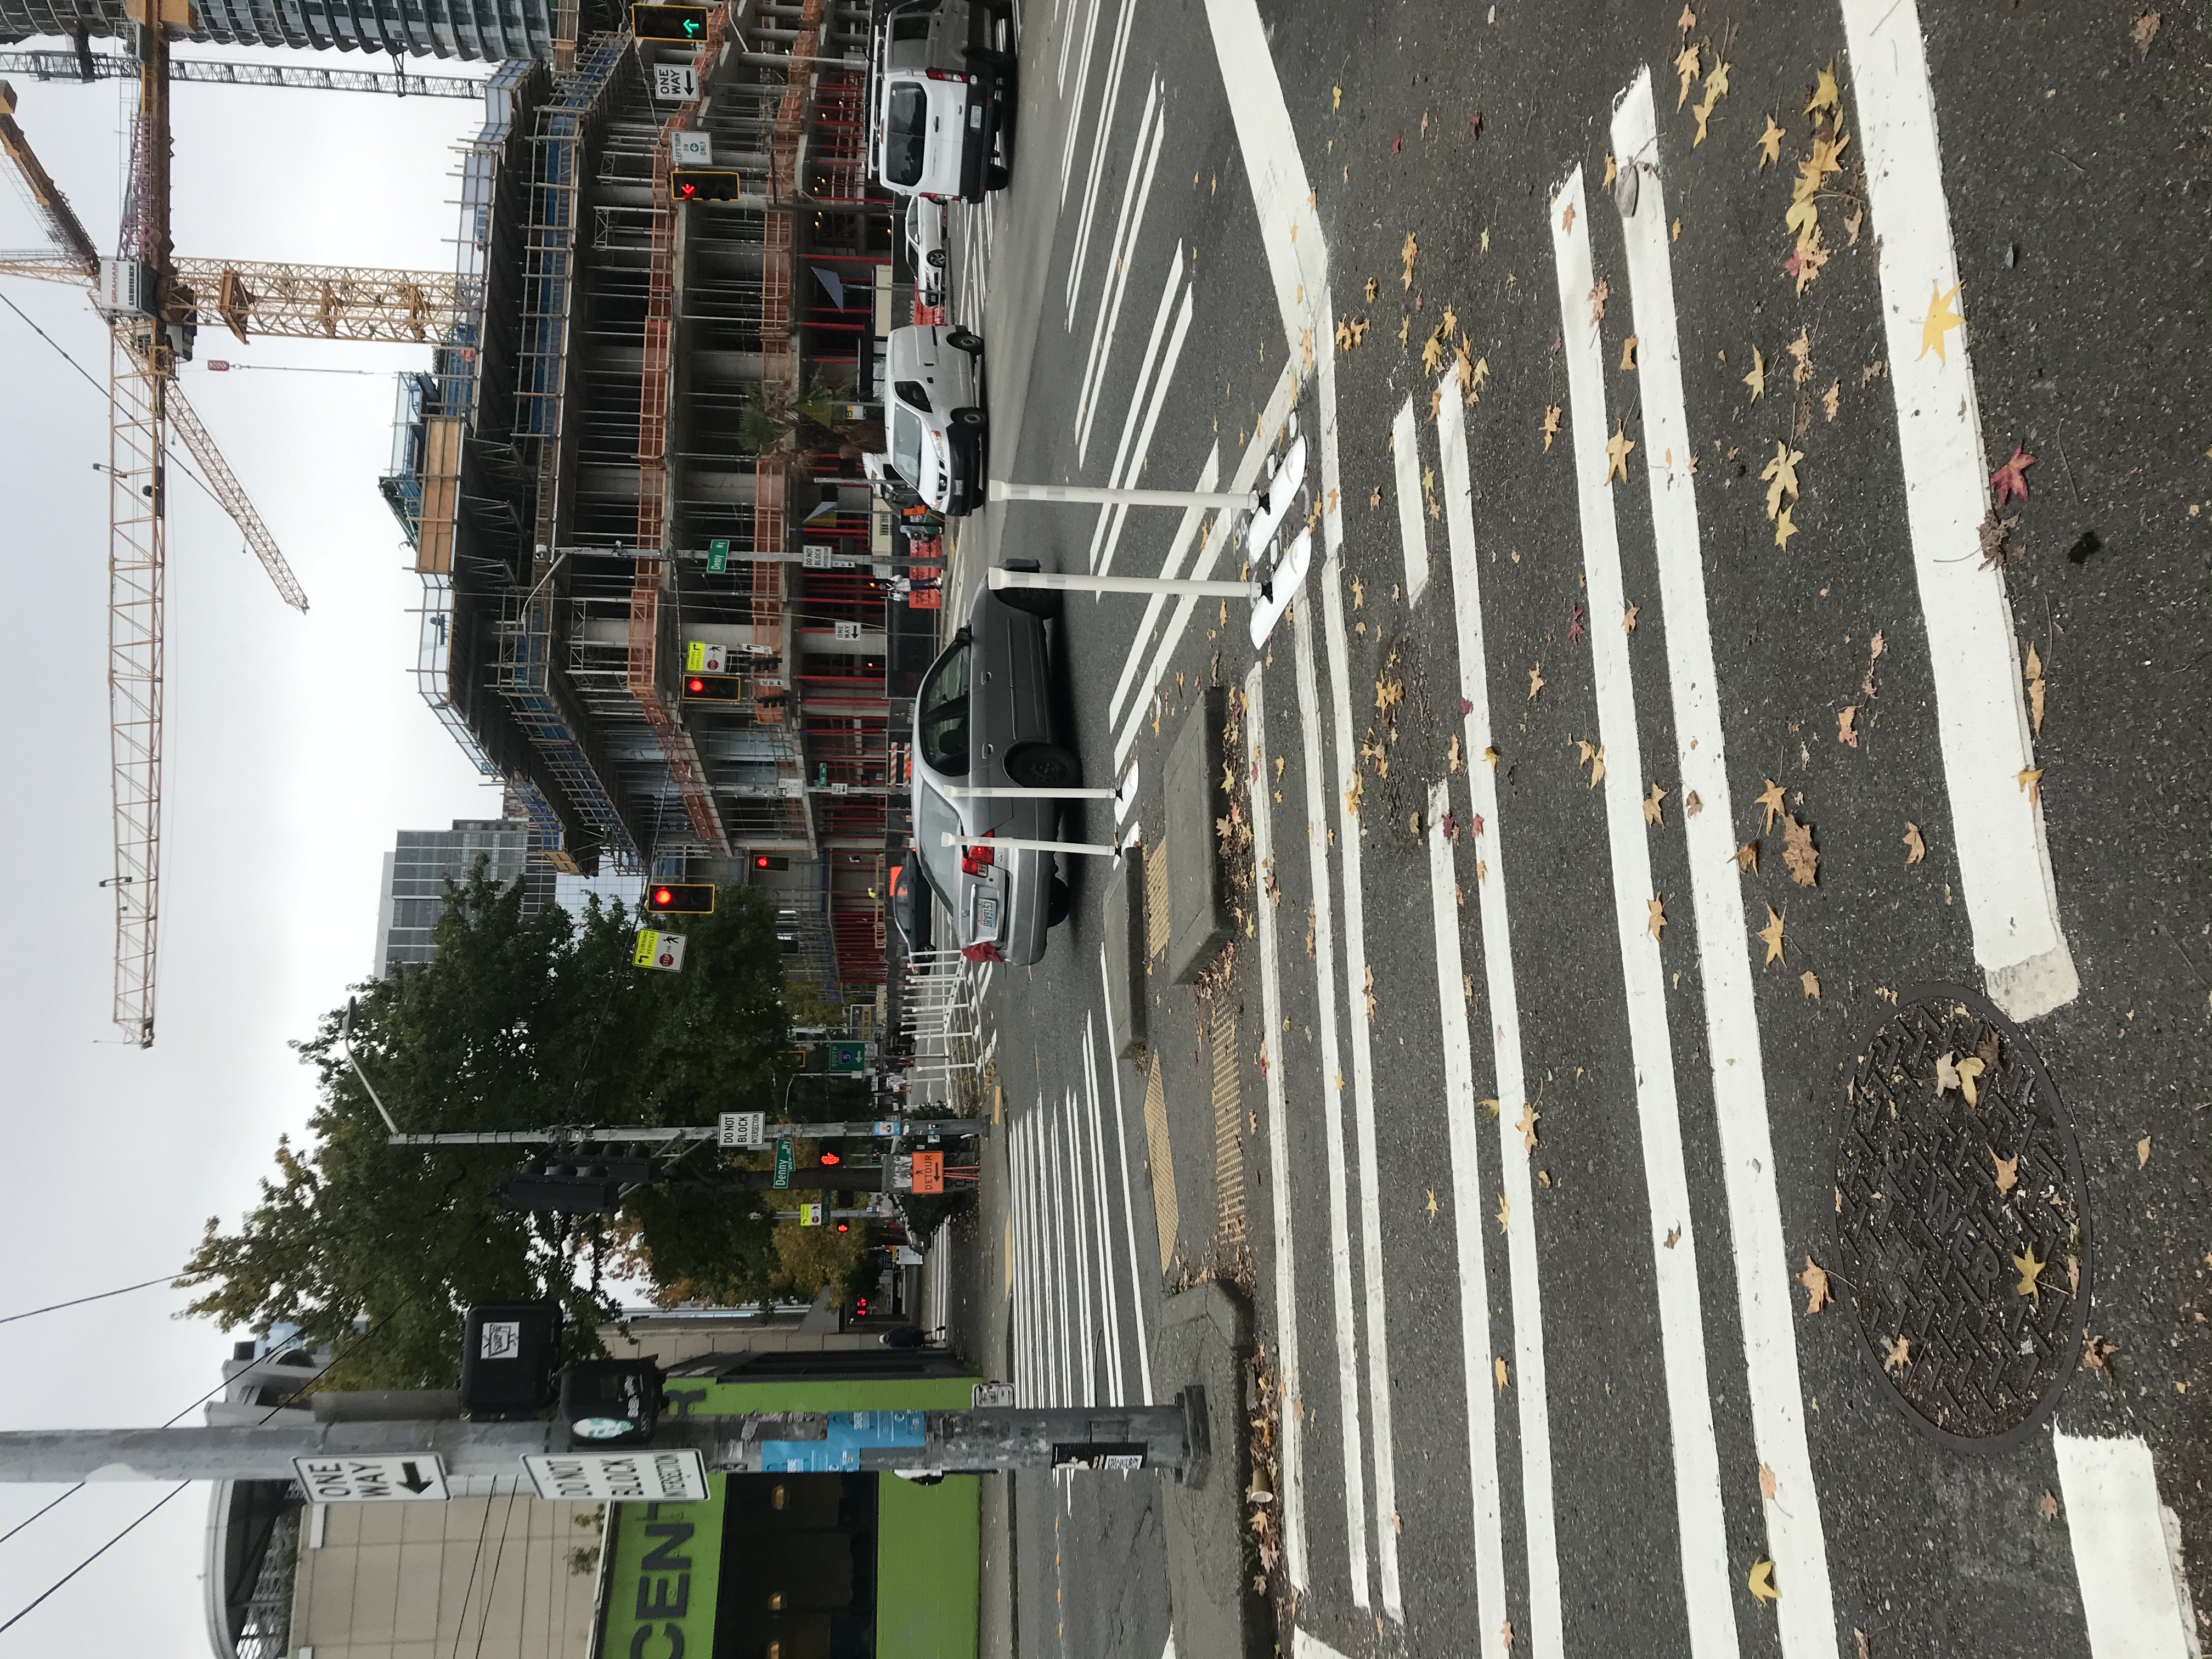 Photo showing newly installed pedestrian crossing safety enhancements.